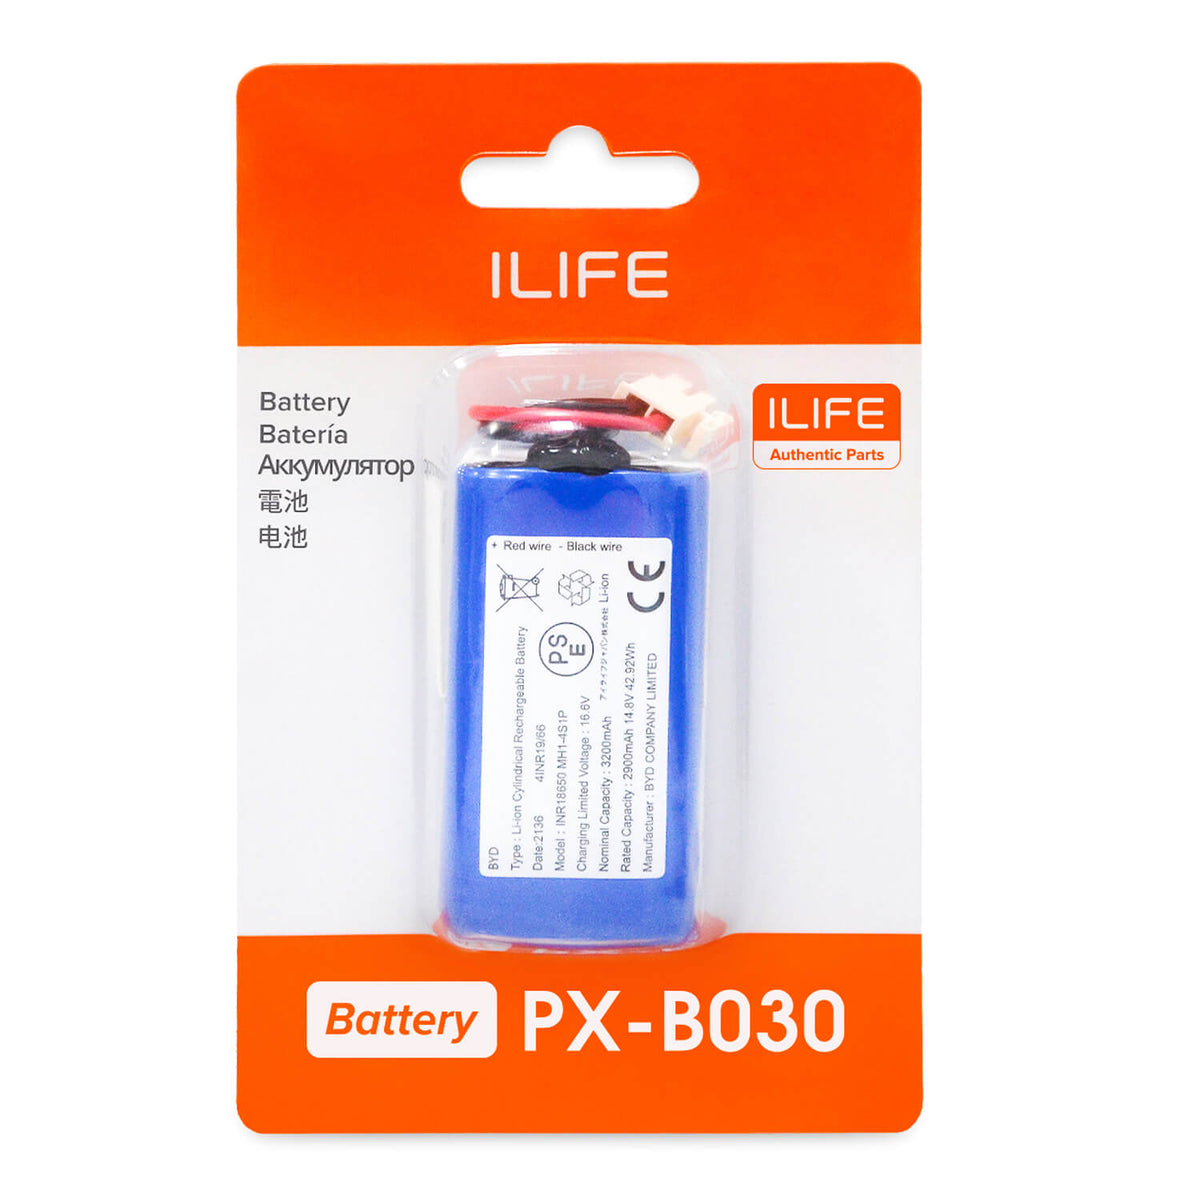 Battery Power Pack for ILIFE A10 W450_1